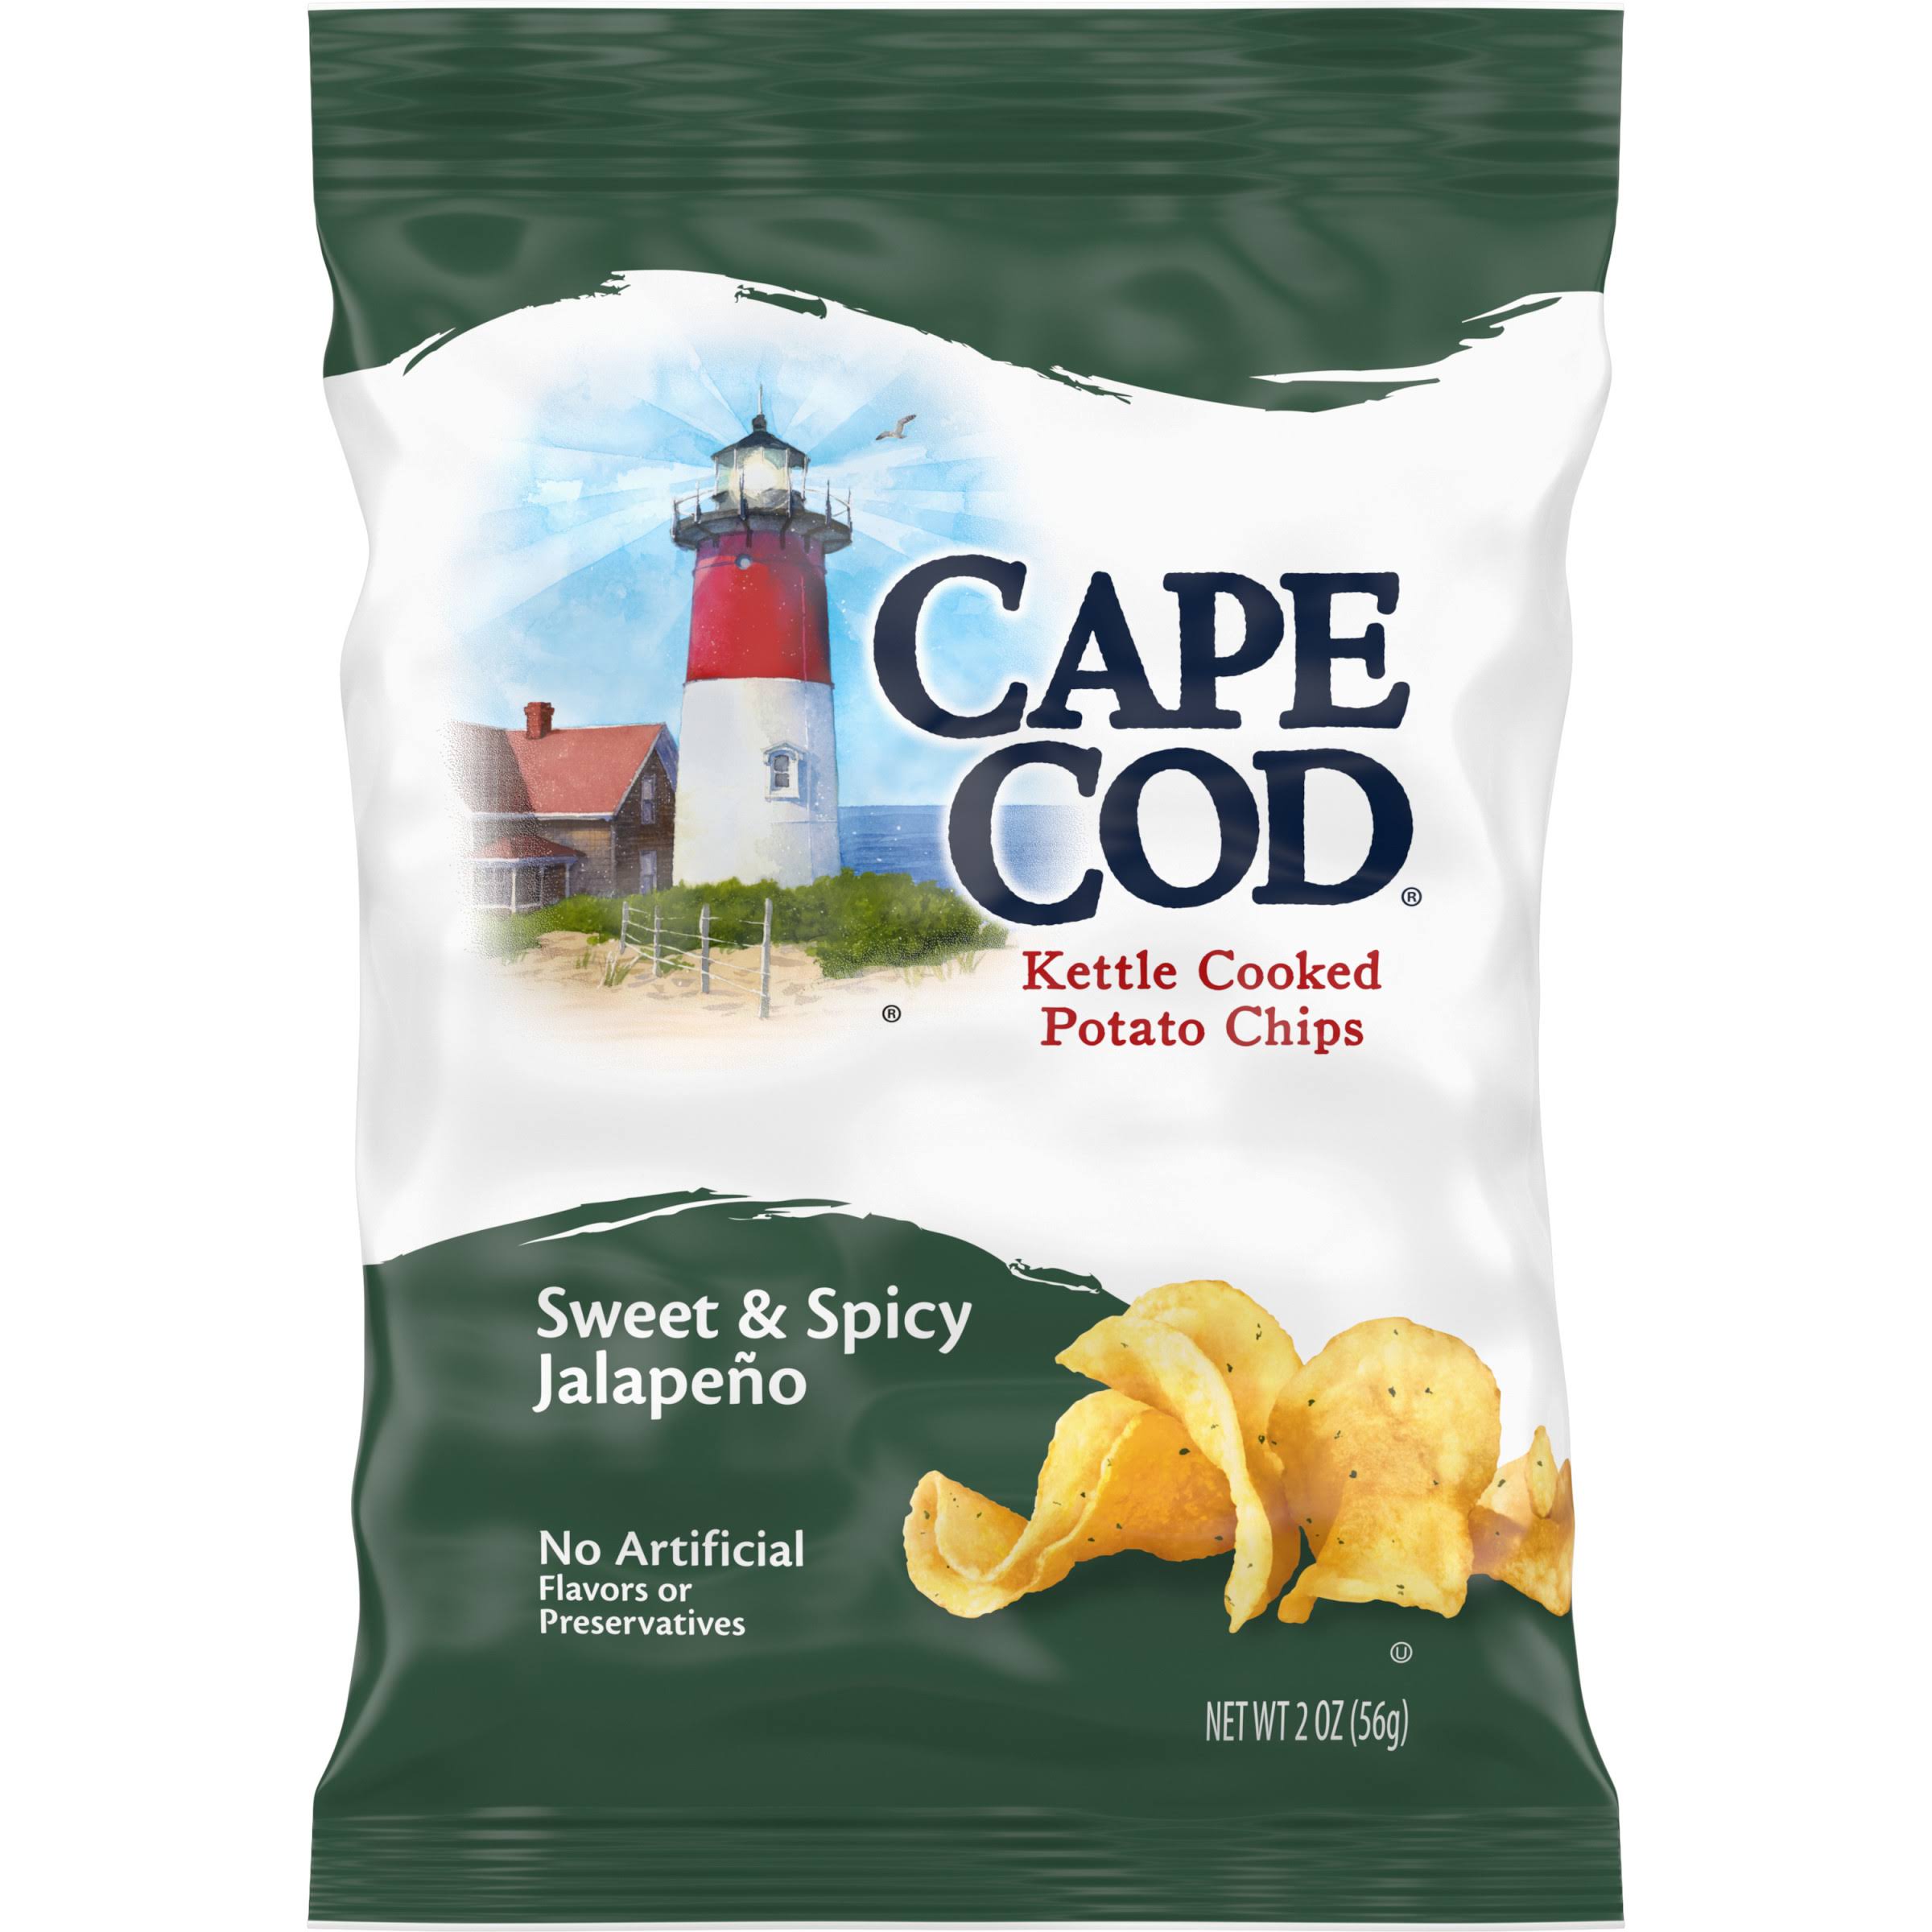 Cape Cod Potato Chips, Kettle Cooked, Sweet & Spicy Jalapeno - 2 oz